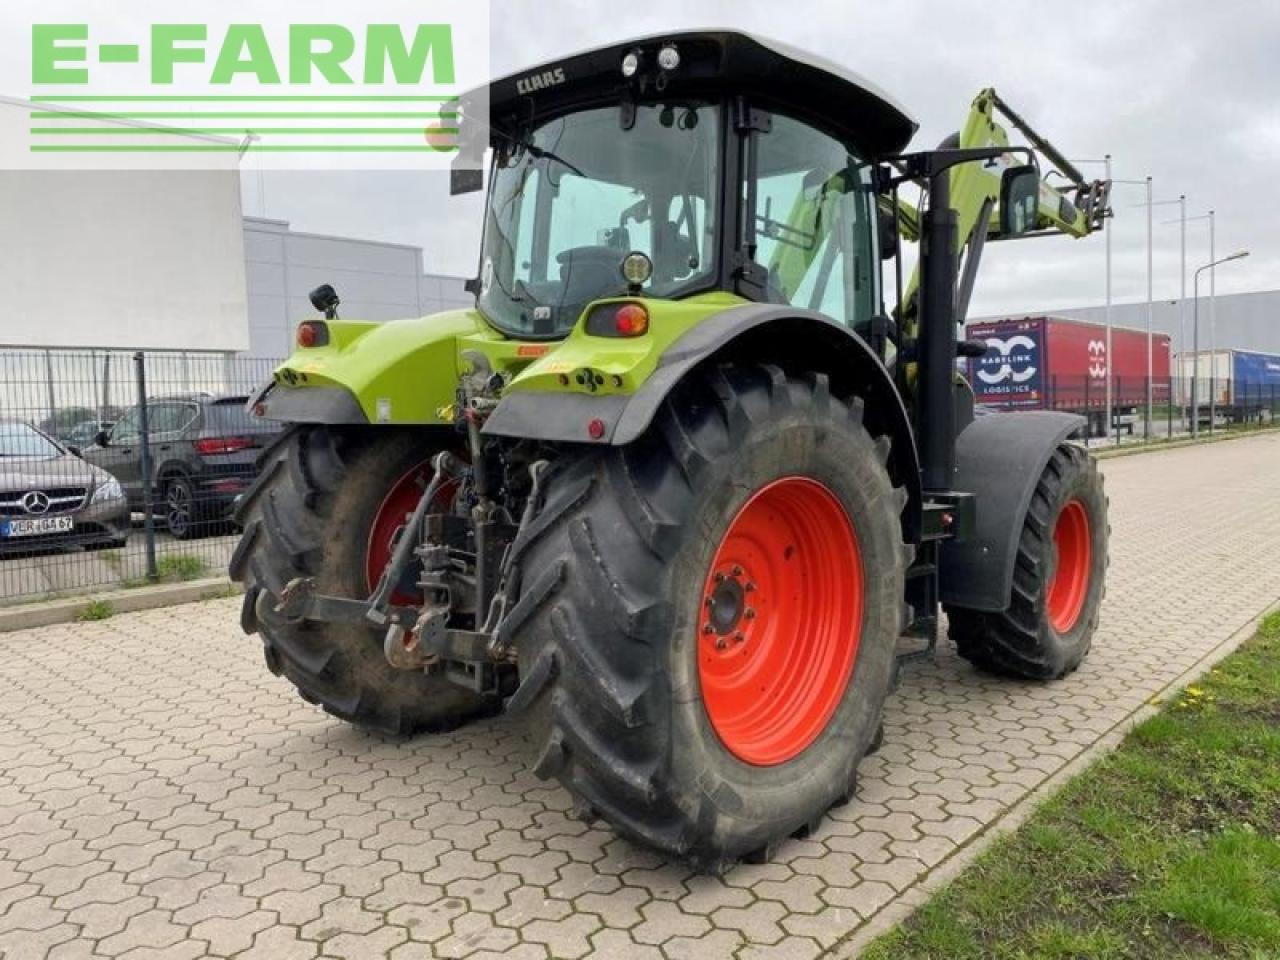 Tractor CLAAS arion 620 cis mit frontlader CIS